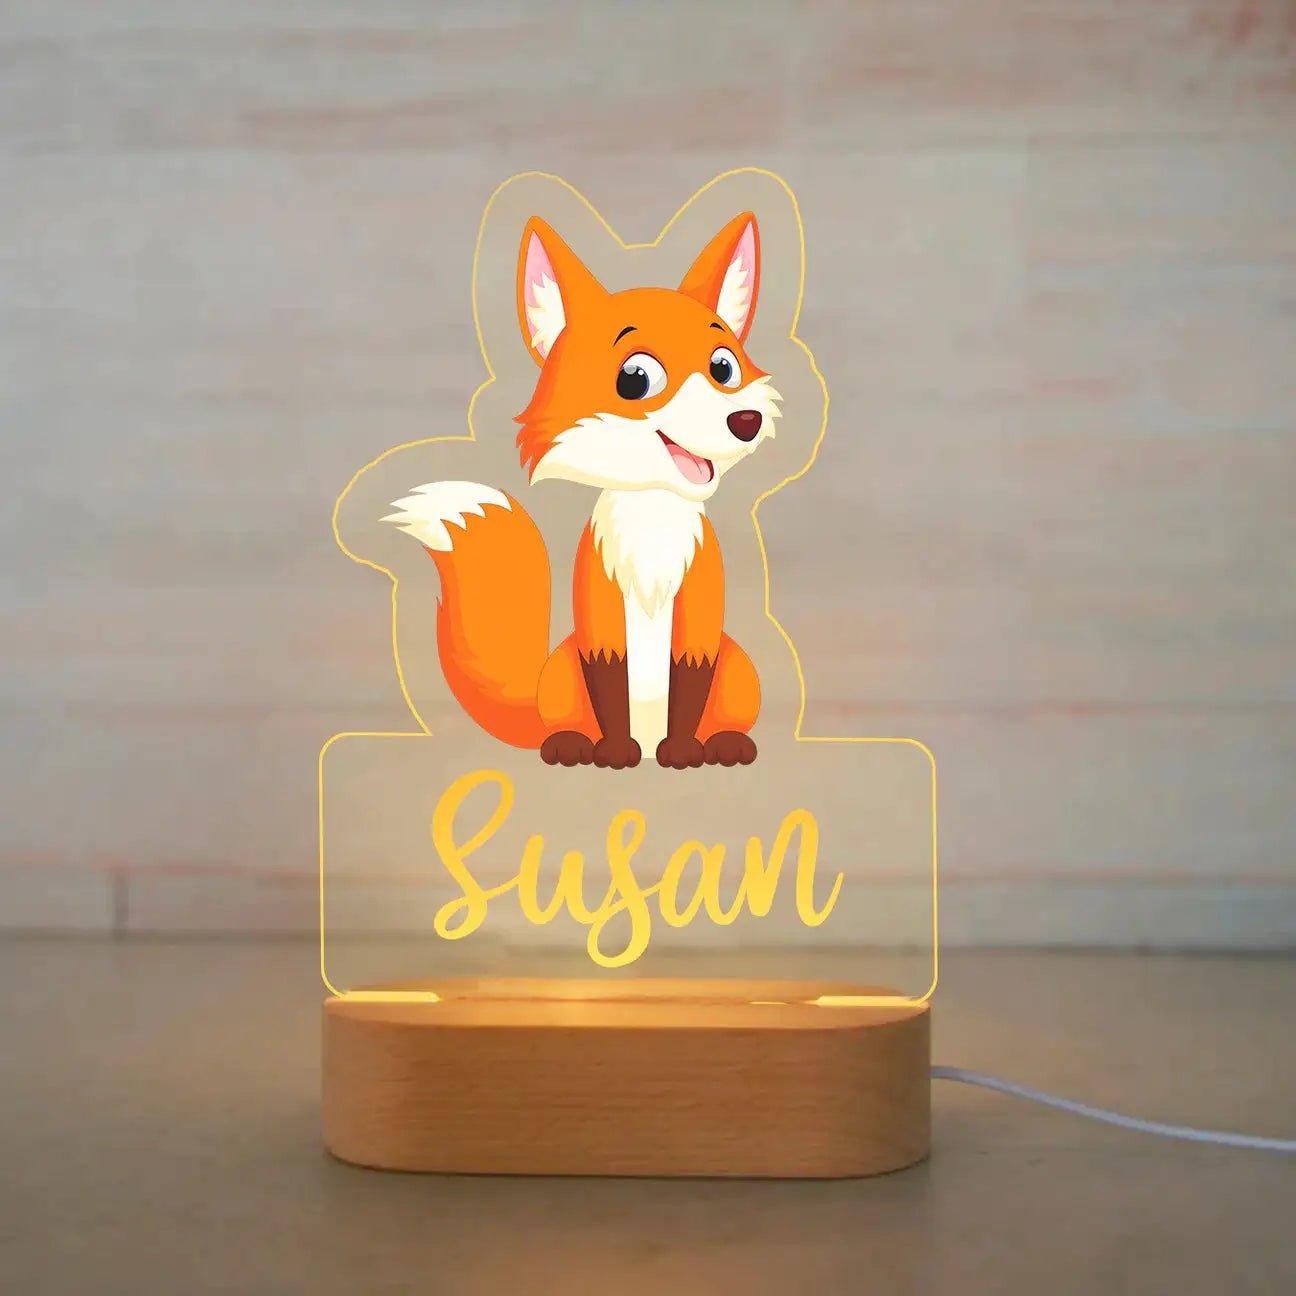 Customized Animal-themed Night Light for Kids - Personalized with Child's Name, Acrylic Lamp for Bedroom Decor Warm Light / 07Fox